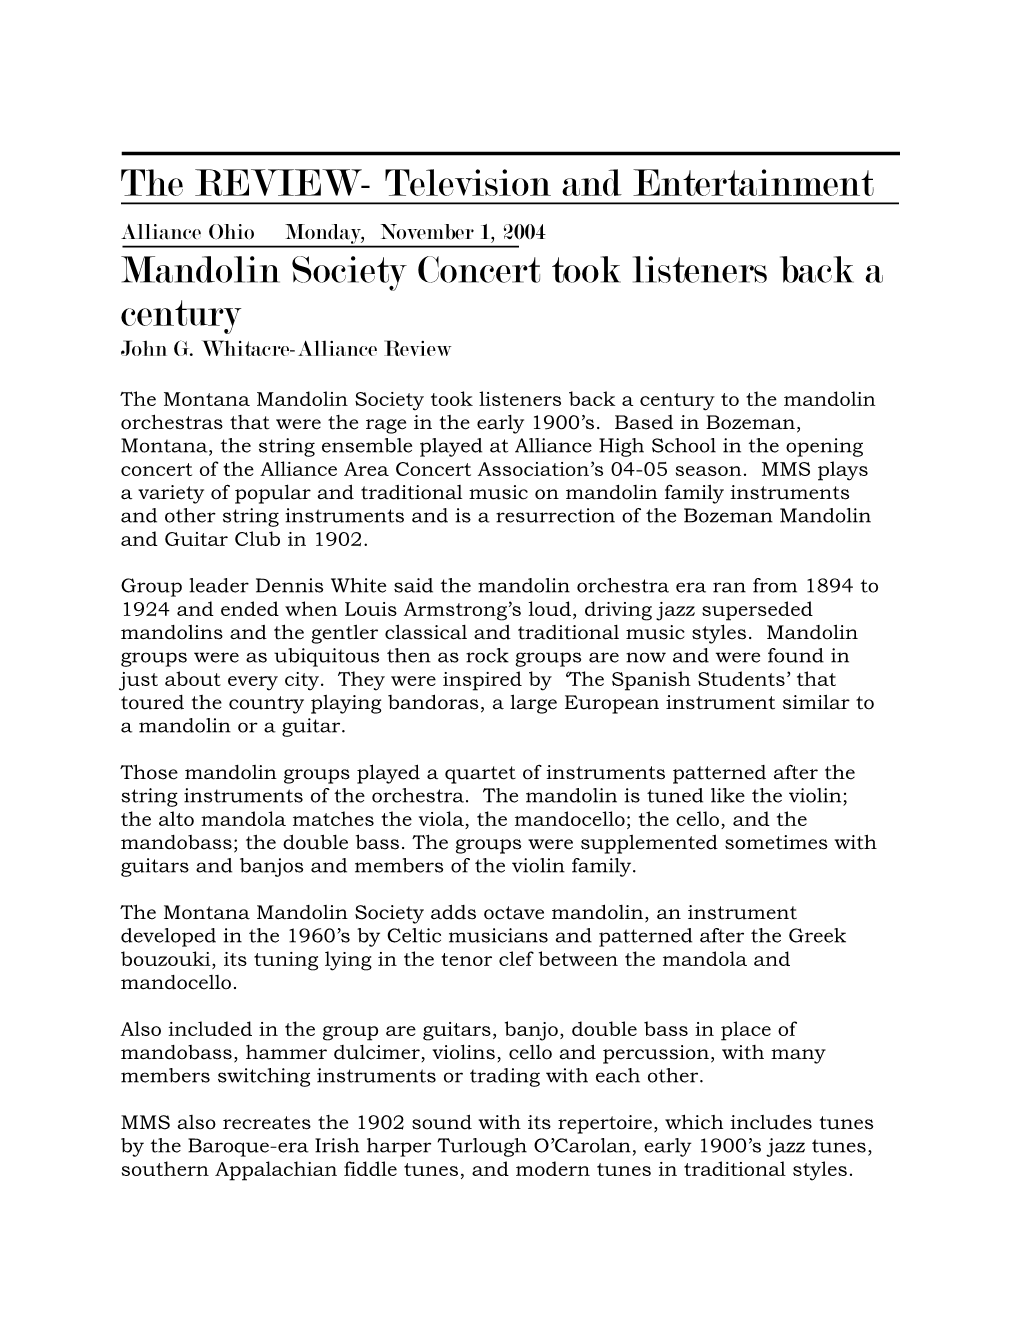 The REVIEW- Television and Entertainment Mandolin Society